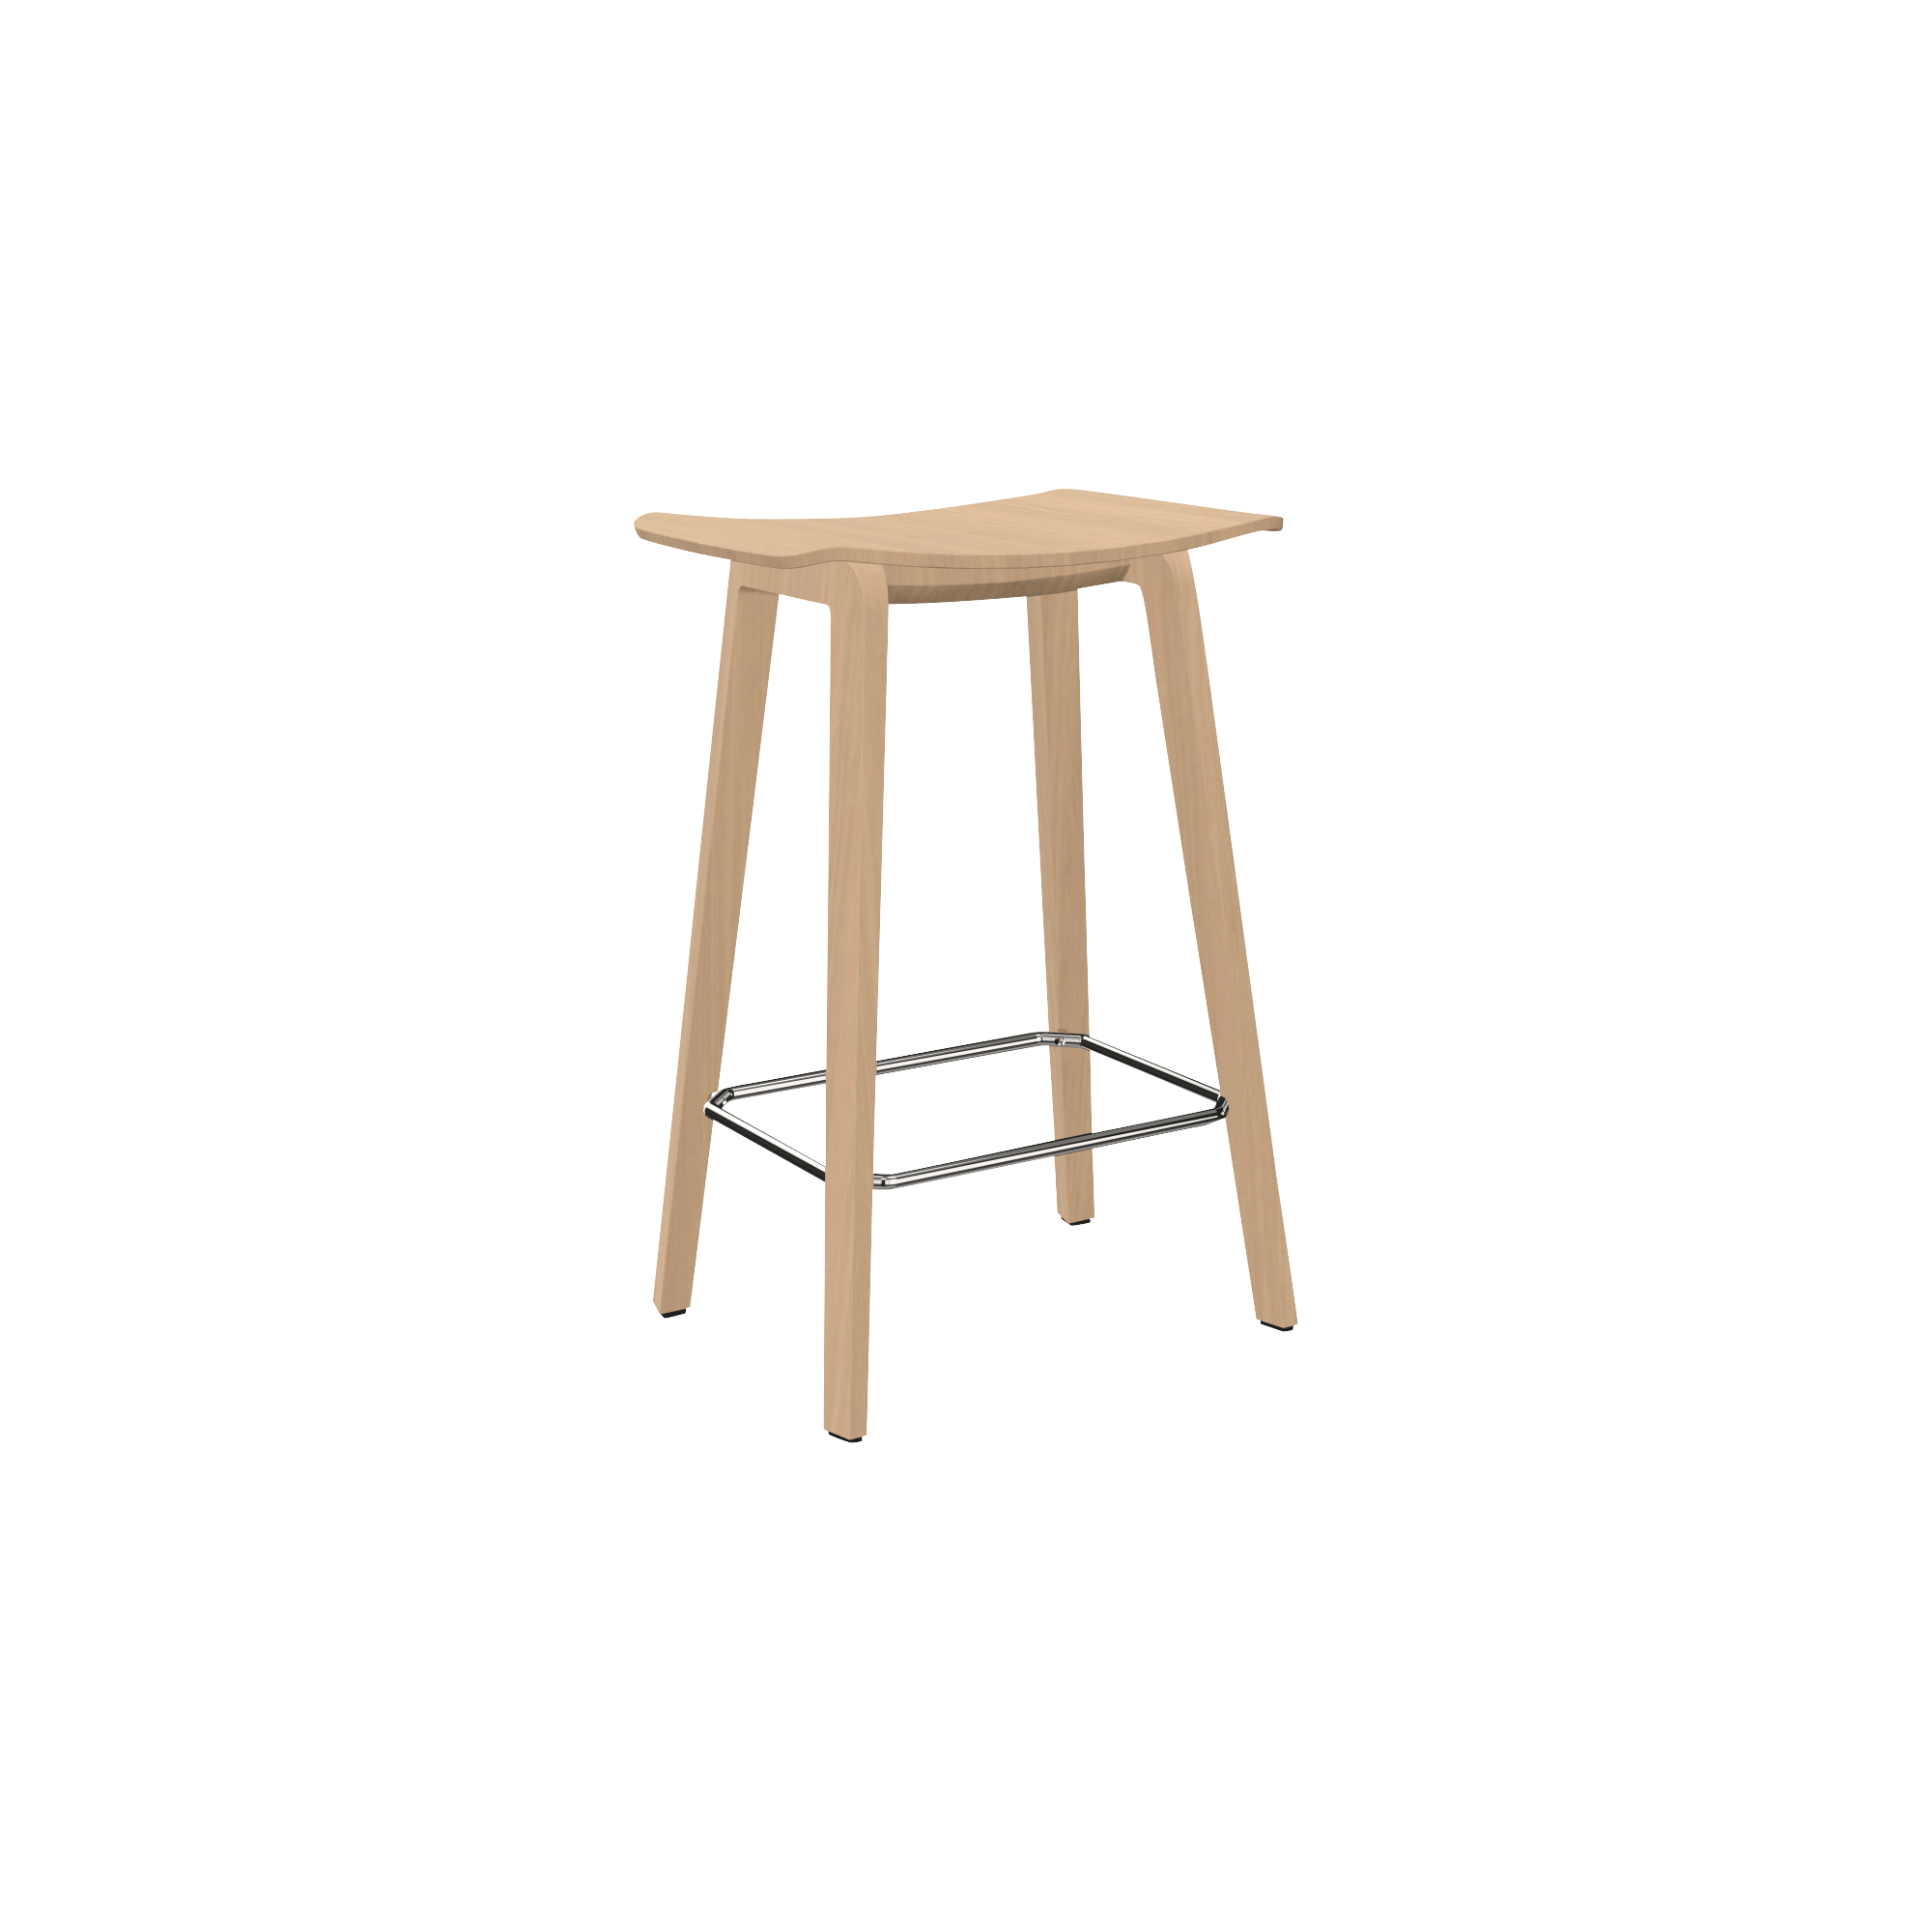 office stool with wooden legs